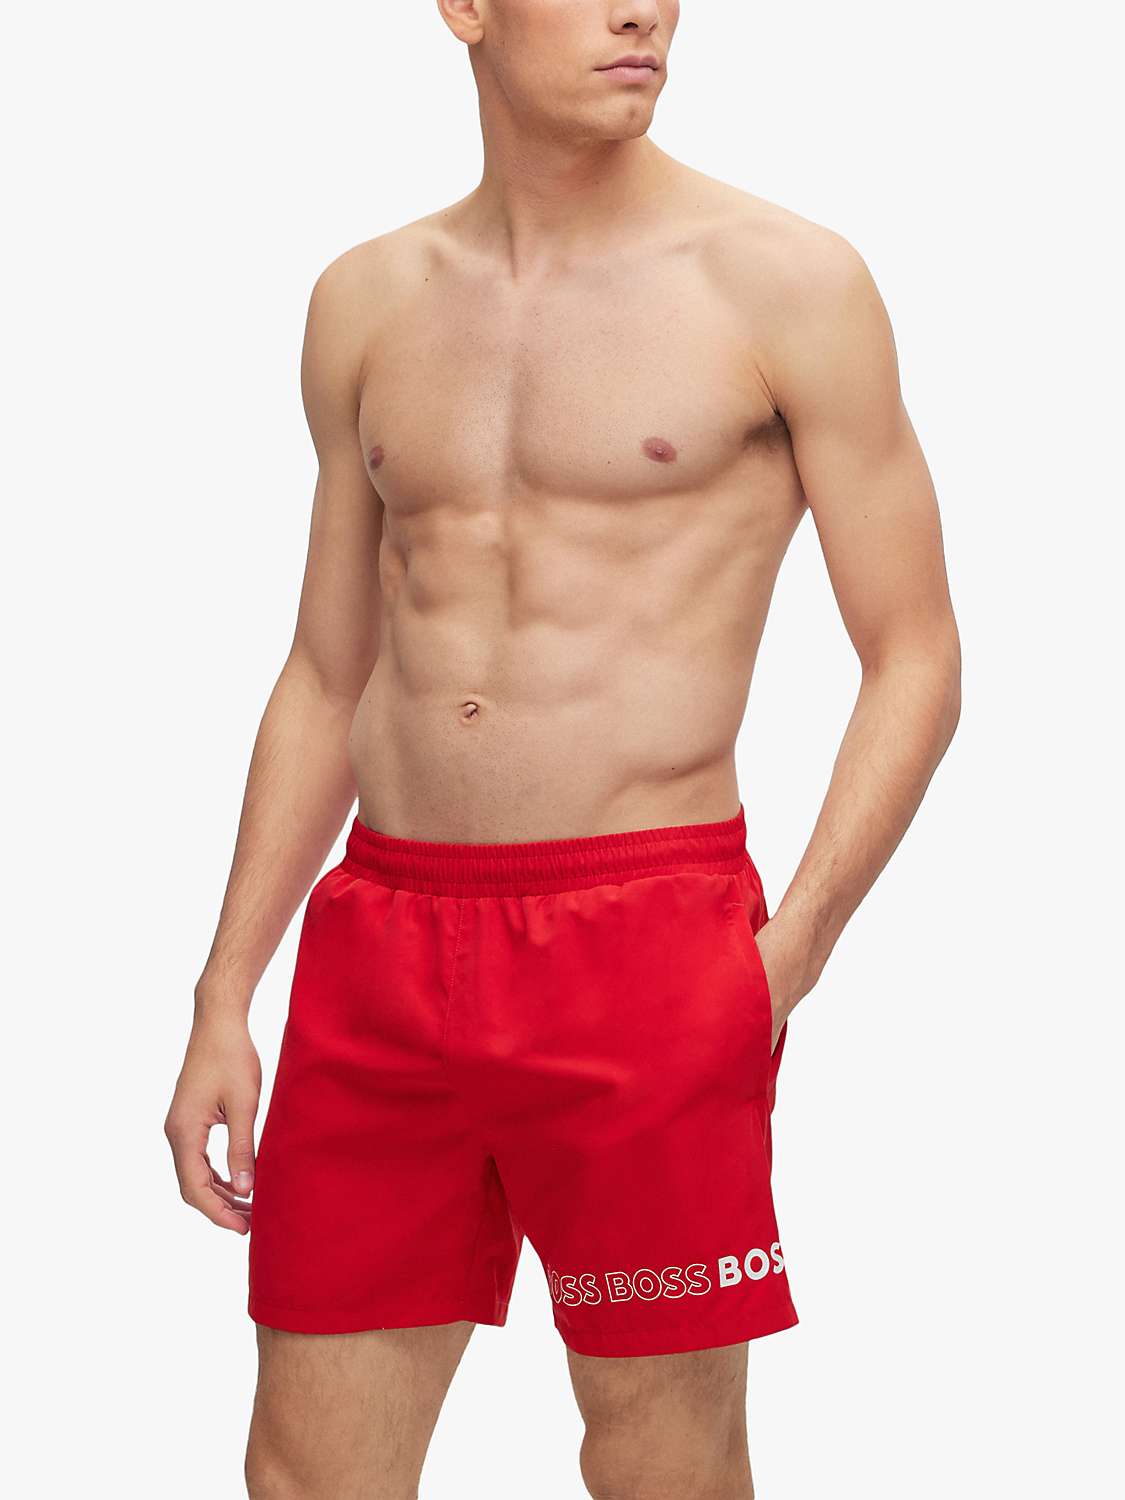 Buy BOSS Dolphin Swim Shorts, Bright Red Online at johnlewis.com